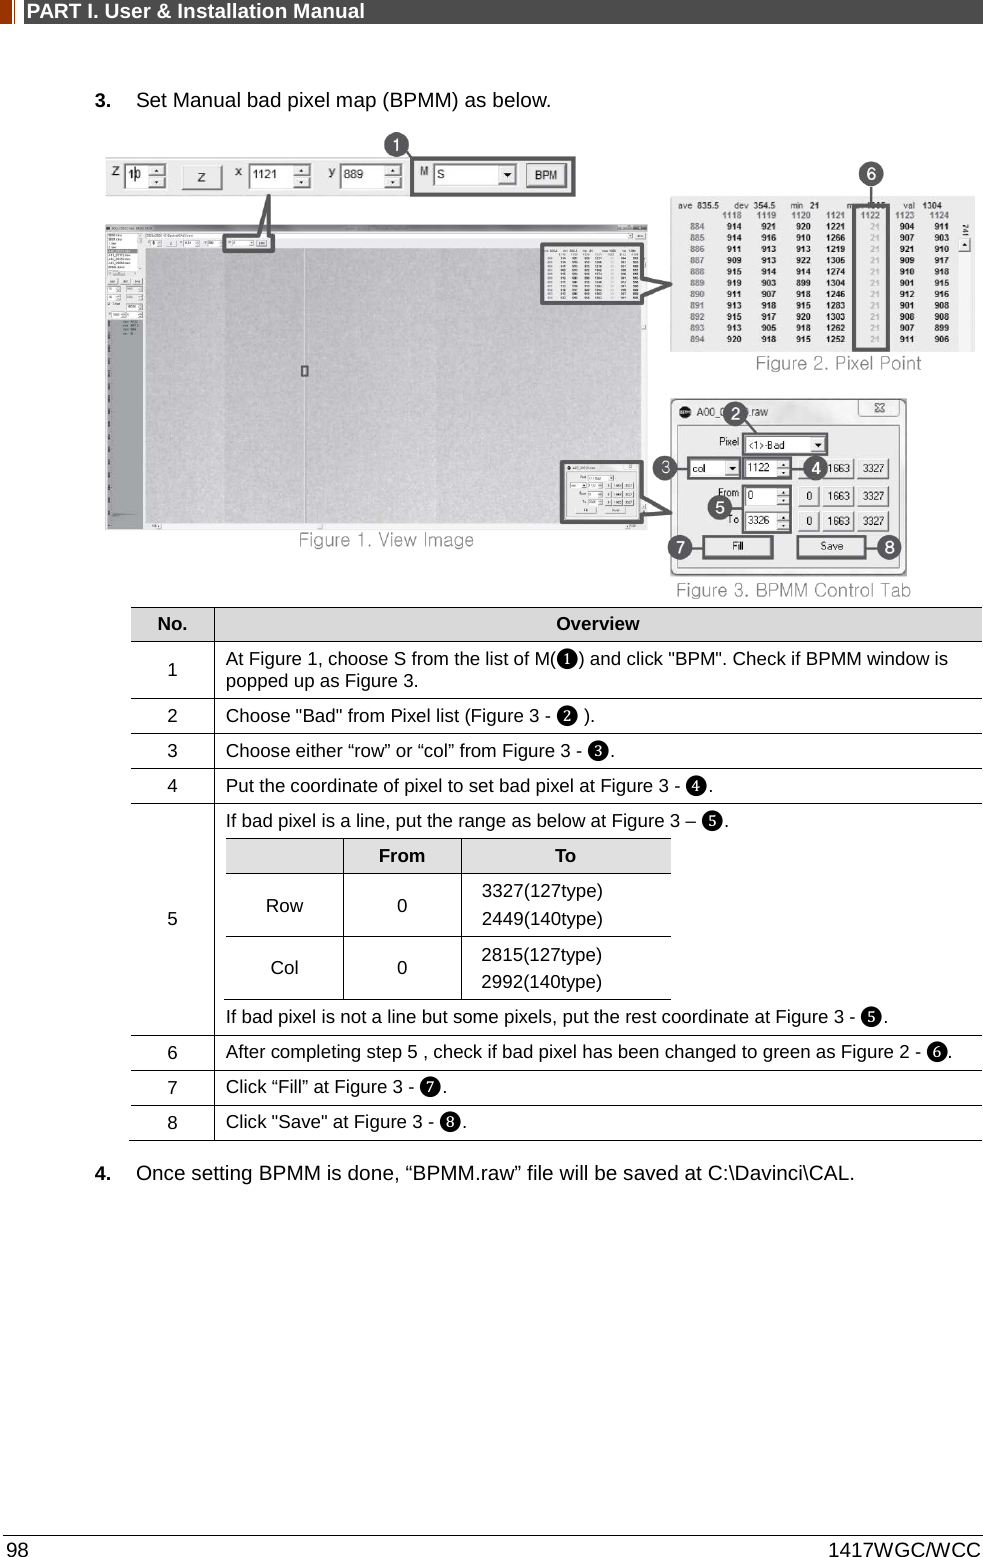 PART I. User &amp; Installation Manual 98 1417WGC/WCC 3. Set Manual bad pixel map (BPMM) as below.  No. Overview 1  At Figure 1, choose S from the list of M(❶) and click &quot;BPM&quot;. Check if BPMM window is popped up as Figure 3. 2  Choose &quot;Bad&quot; from Pixel list (Figure 3 - ❷ ). 3  Choose either “row” or “col” from Figure 3 - ❸. 4  Put the coordinate of pixel to set bad pixel at Figure 3 - ❹. 5 If bad pixel is a line, put the range as below at Figure 3 – ❺.  From To Row  0  3327(127type) 2449(140type) Col  0  2815(127type) 2992(140type) If bad pixel is not a line but some pixels, put the rest coordinate at Figure 3 - ❺. 6  After completing step 5 , check if bad pixel has been changed to green as Figure 2 - ❻. 7  Click “Fill” at Figure 3 - ❼. 8  Click &quot;Save&quot; at Figure 3 - ❽. 4. Once setting BPMM is done, “BPMM.raw” file will be saved at C:\Davinci\CAL. 